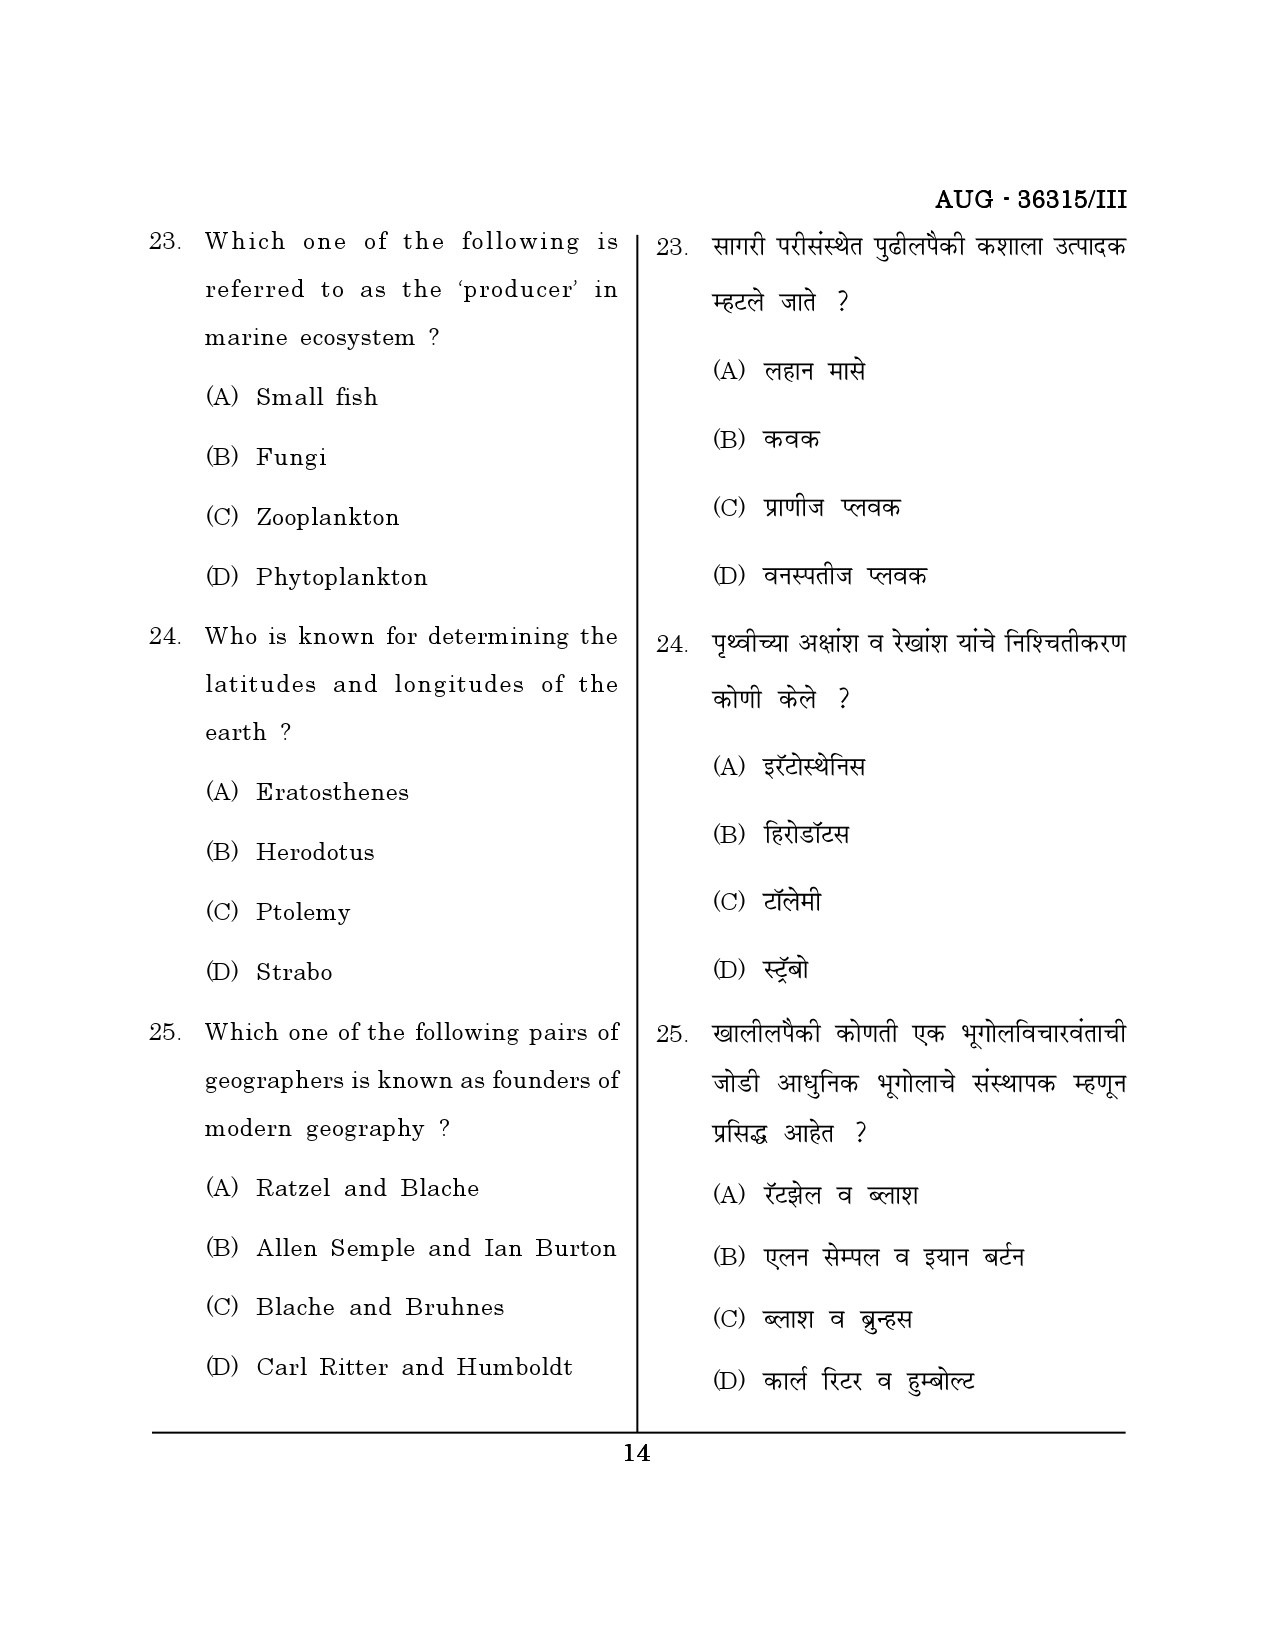 Maharashtra SET Geography Question Paper III August 2015 13